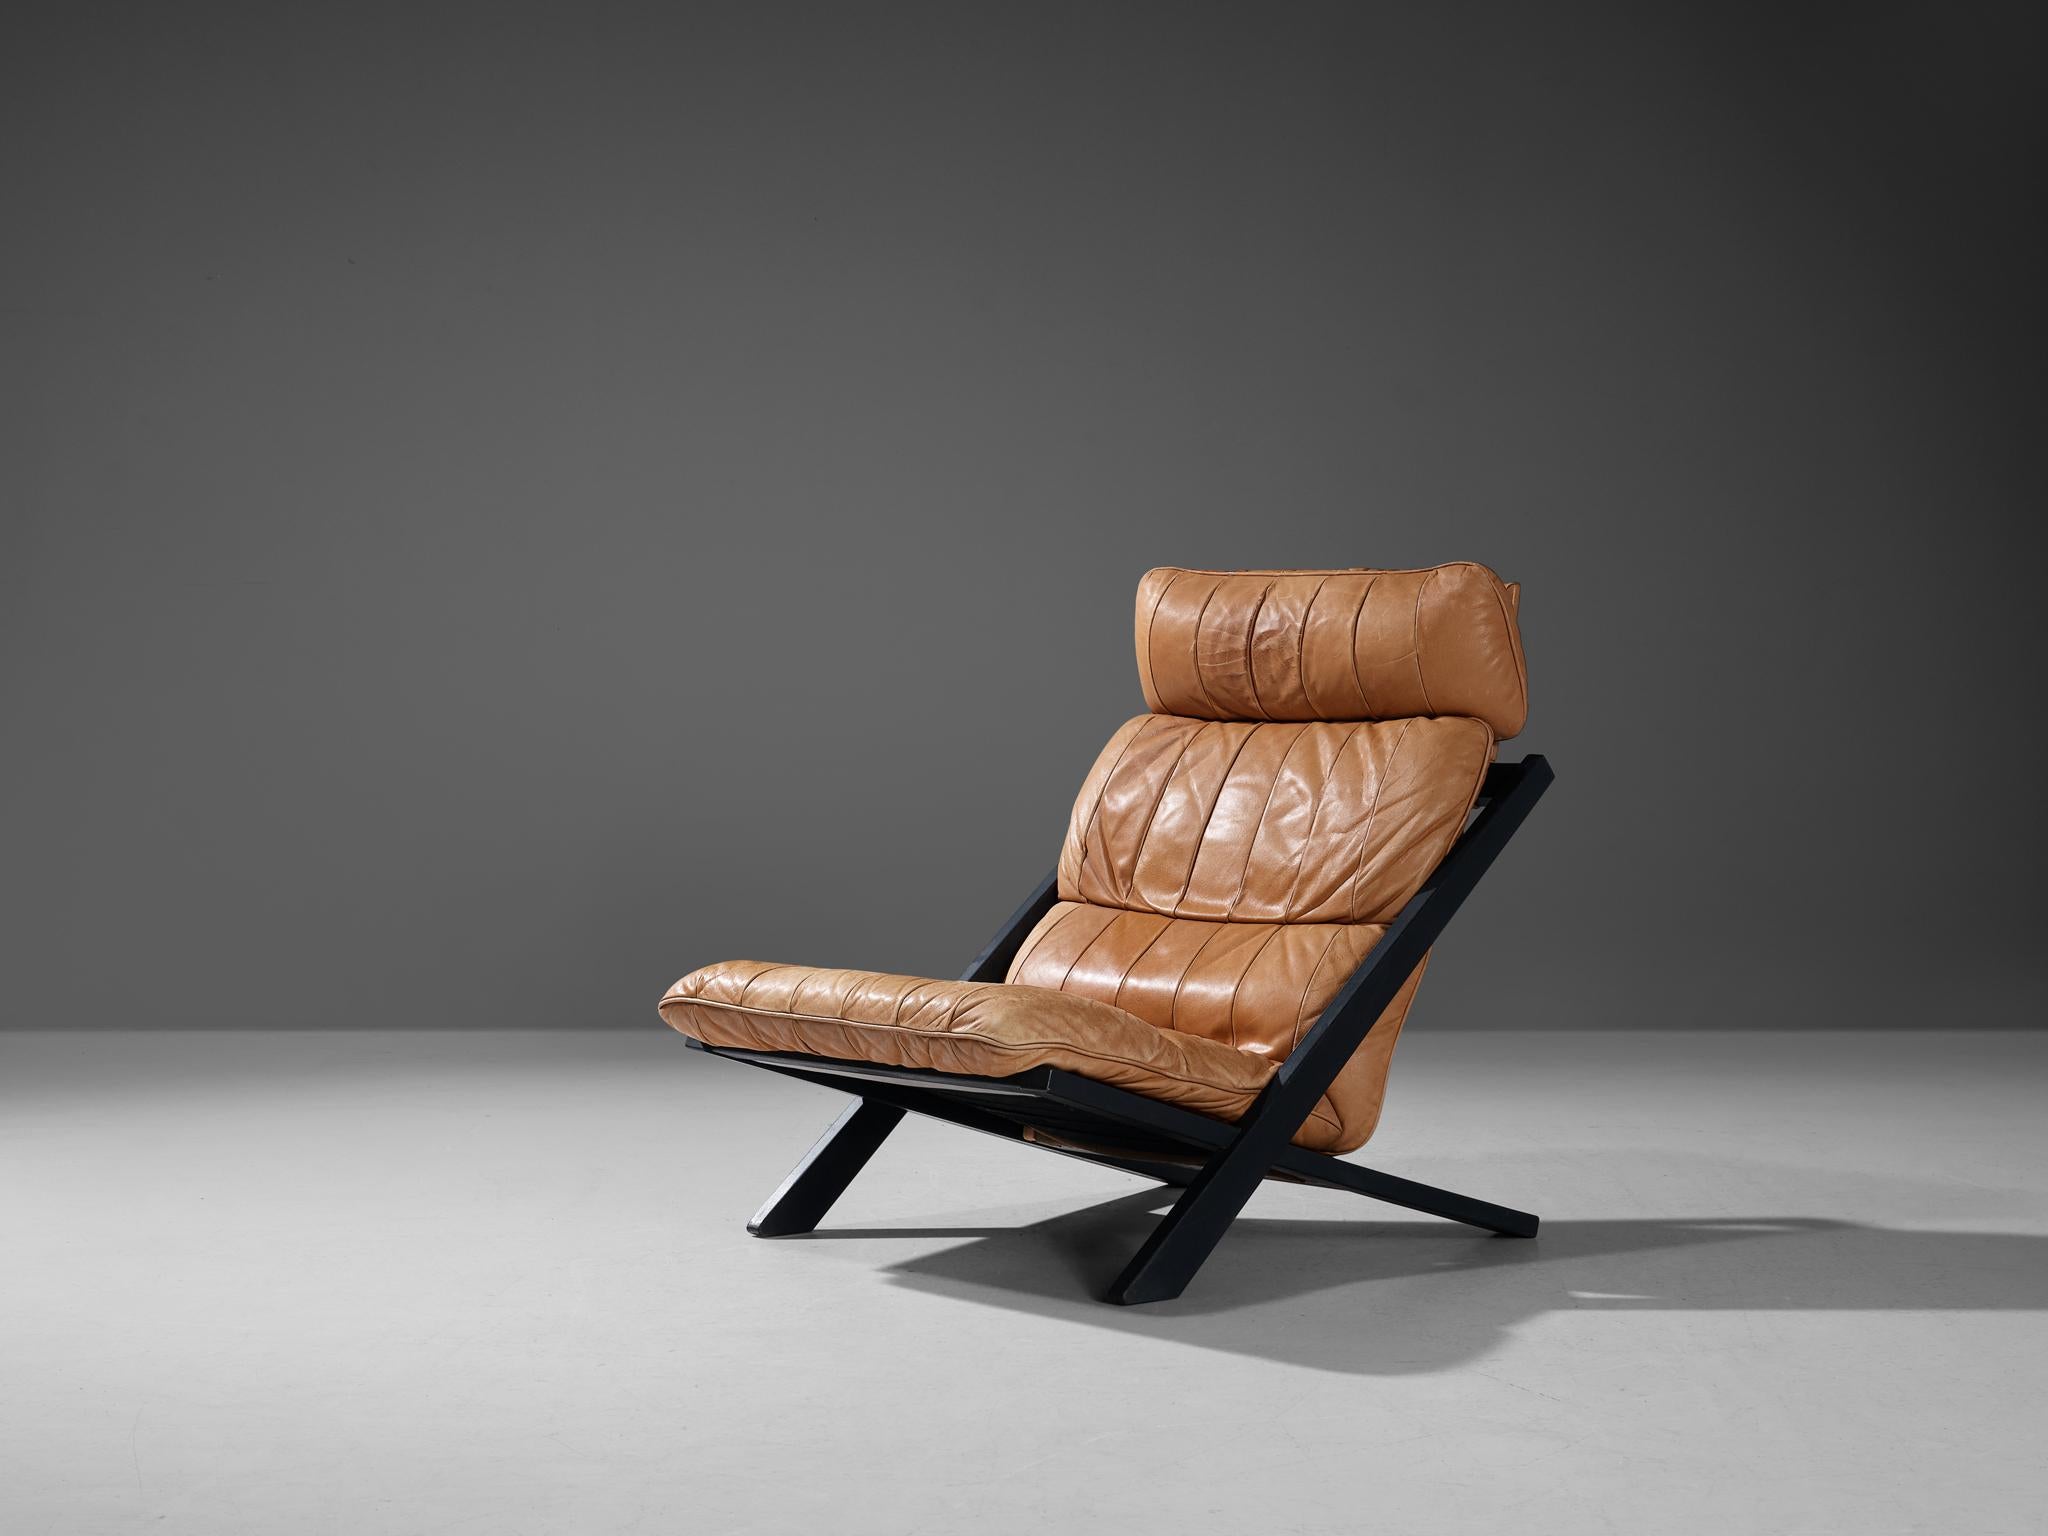 Ueli Berger for De Sede, lounge chair, wood and leather, Switzerland, 1970s

High back lounge chair designed by Ueli Berger and manufactured by Swiss quality manufacturer De Sede. The X-shaped frame consists of dark lacquered wood. This makes an